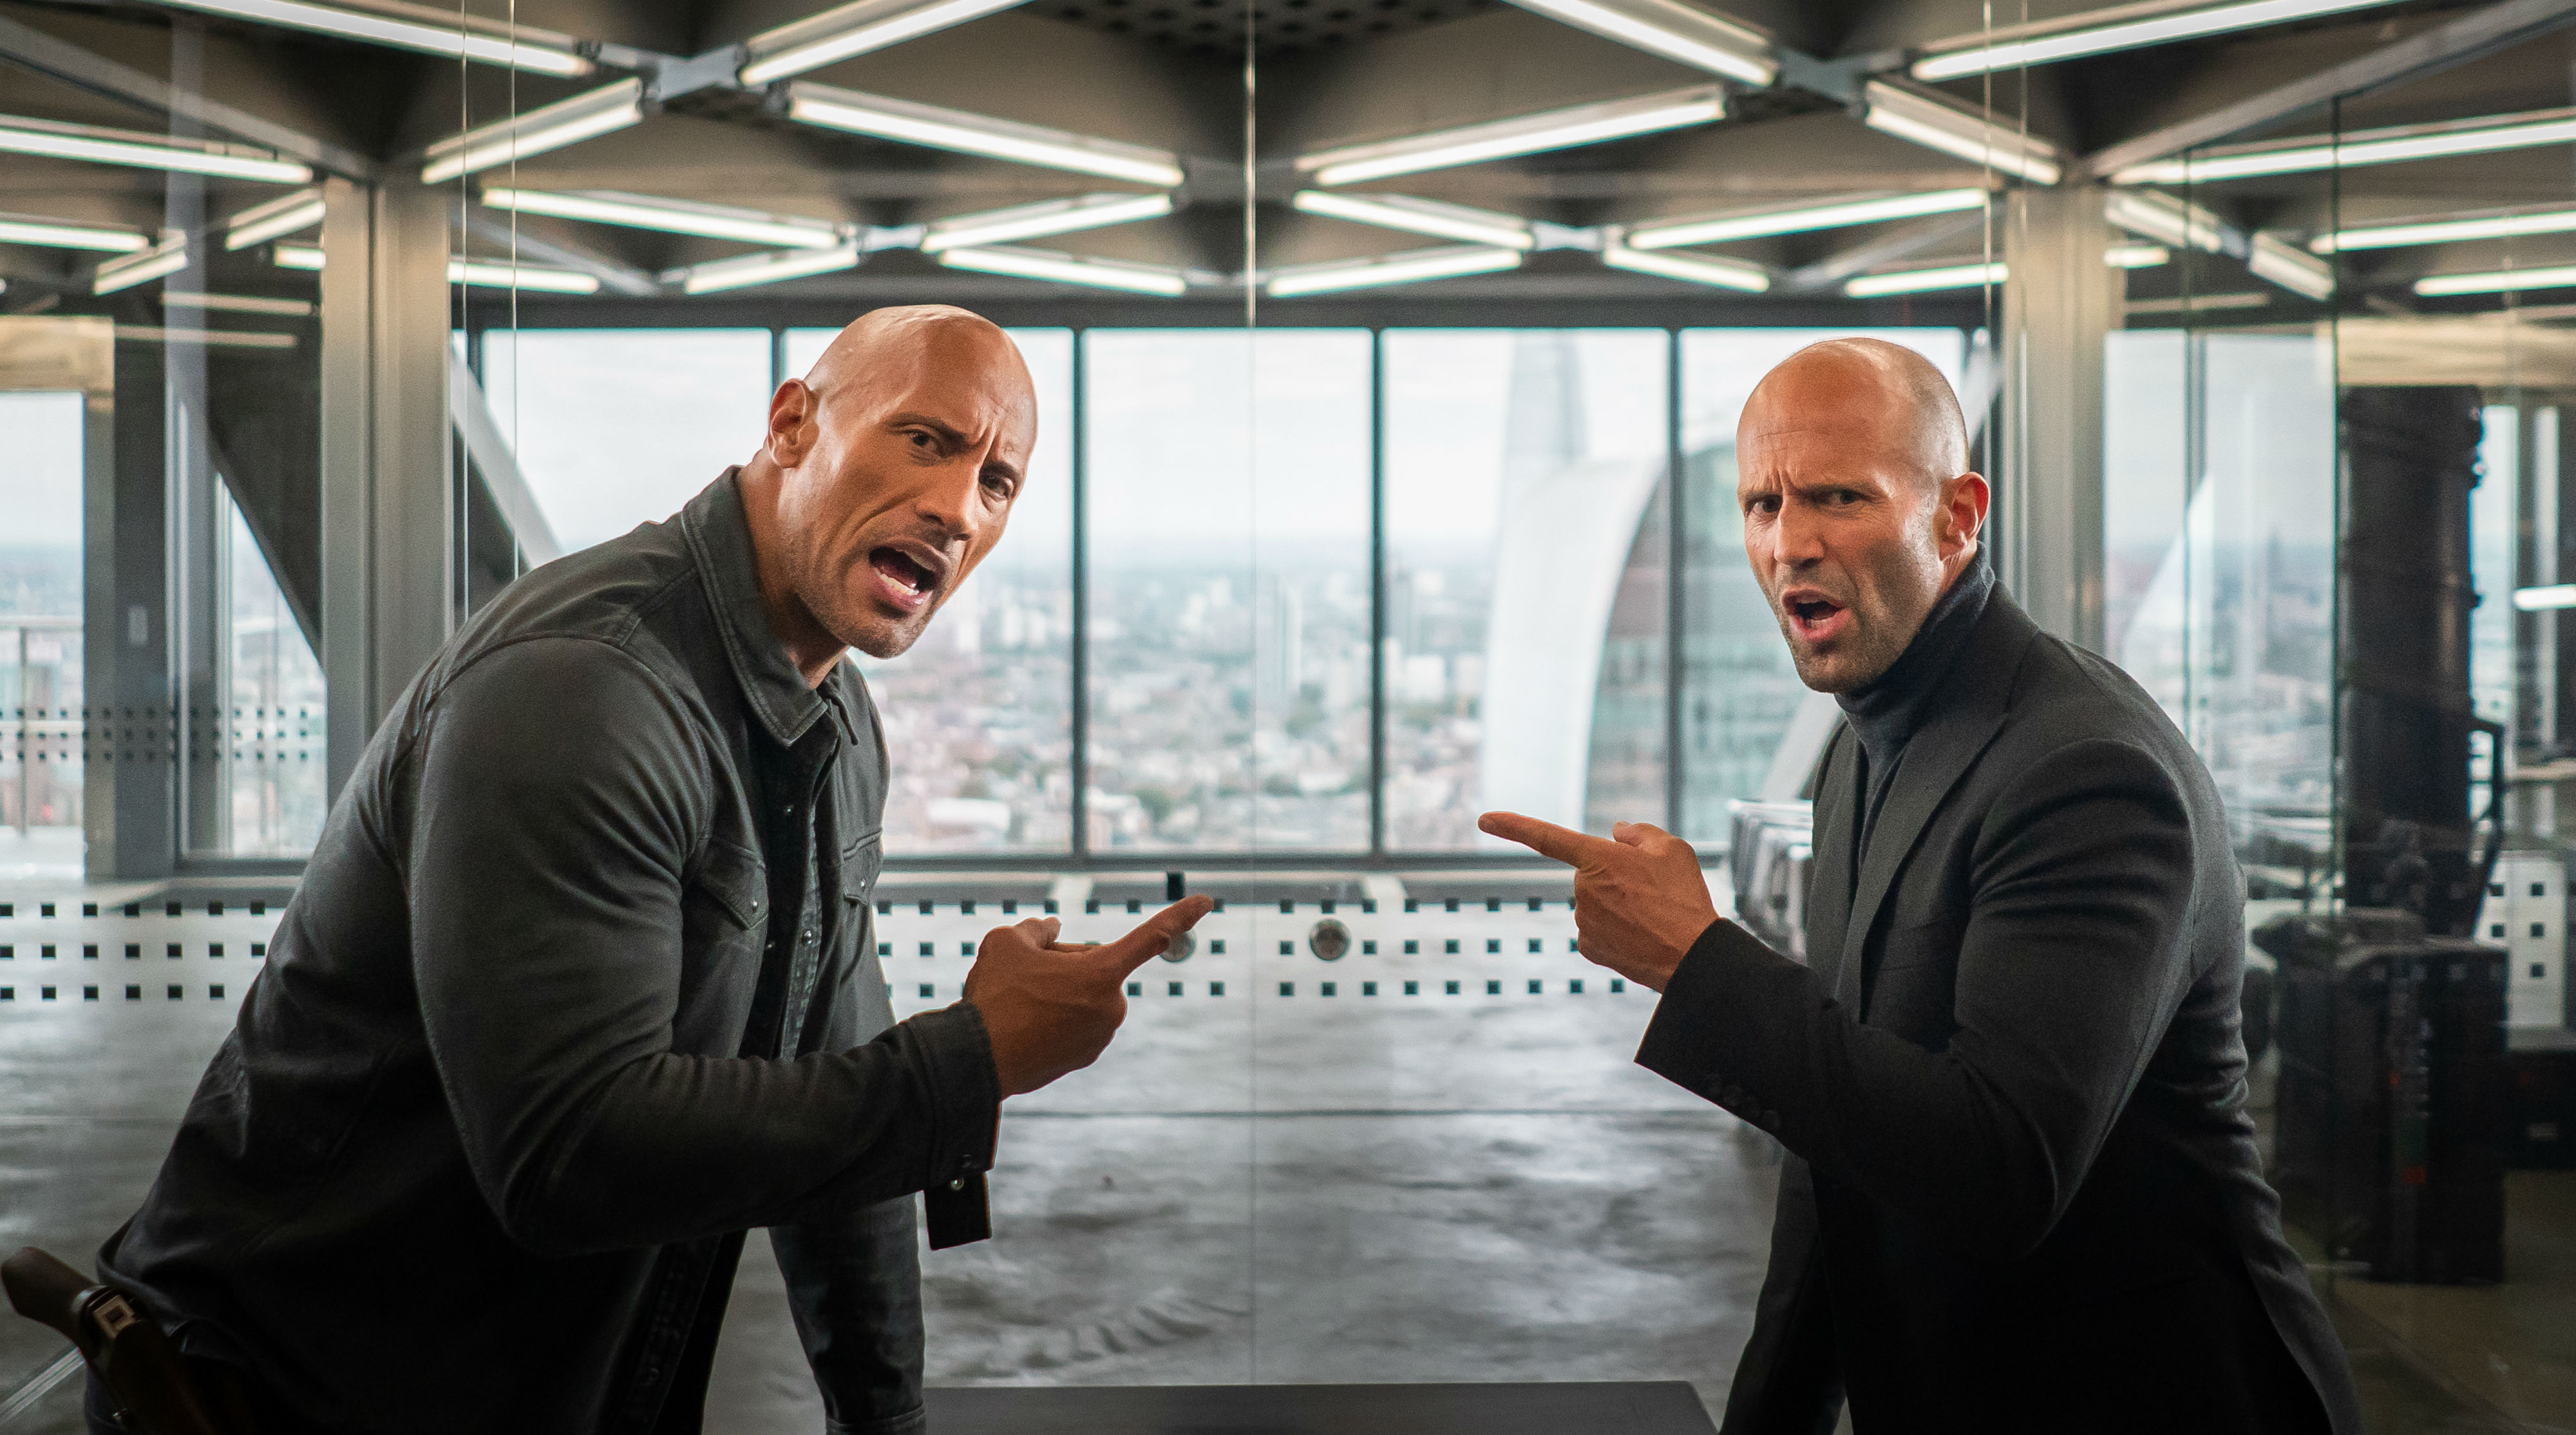 Hobbs & Shaw Brings In $5.8M In Thursday Preview Numbers